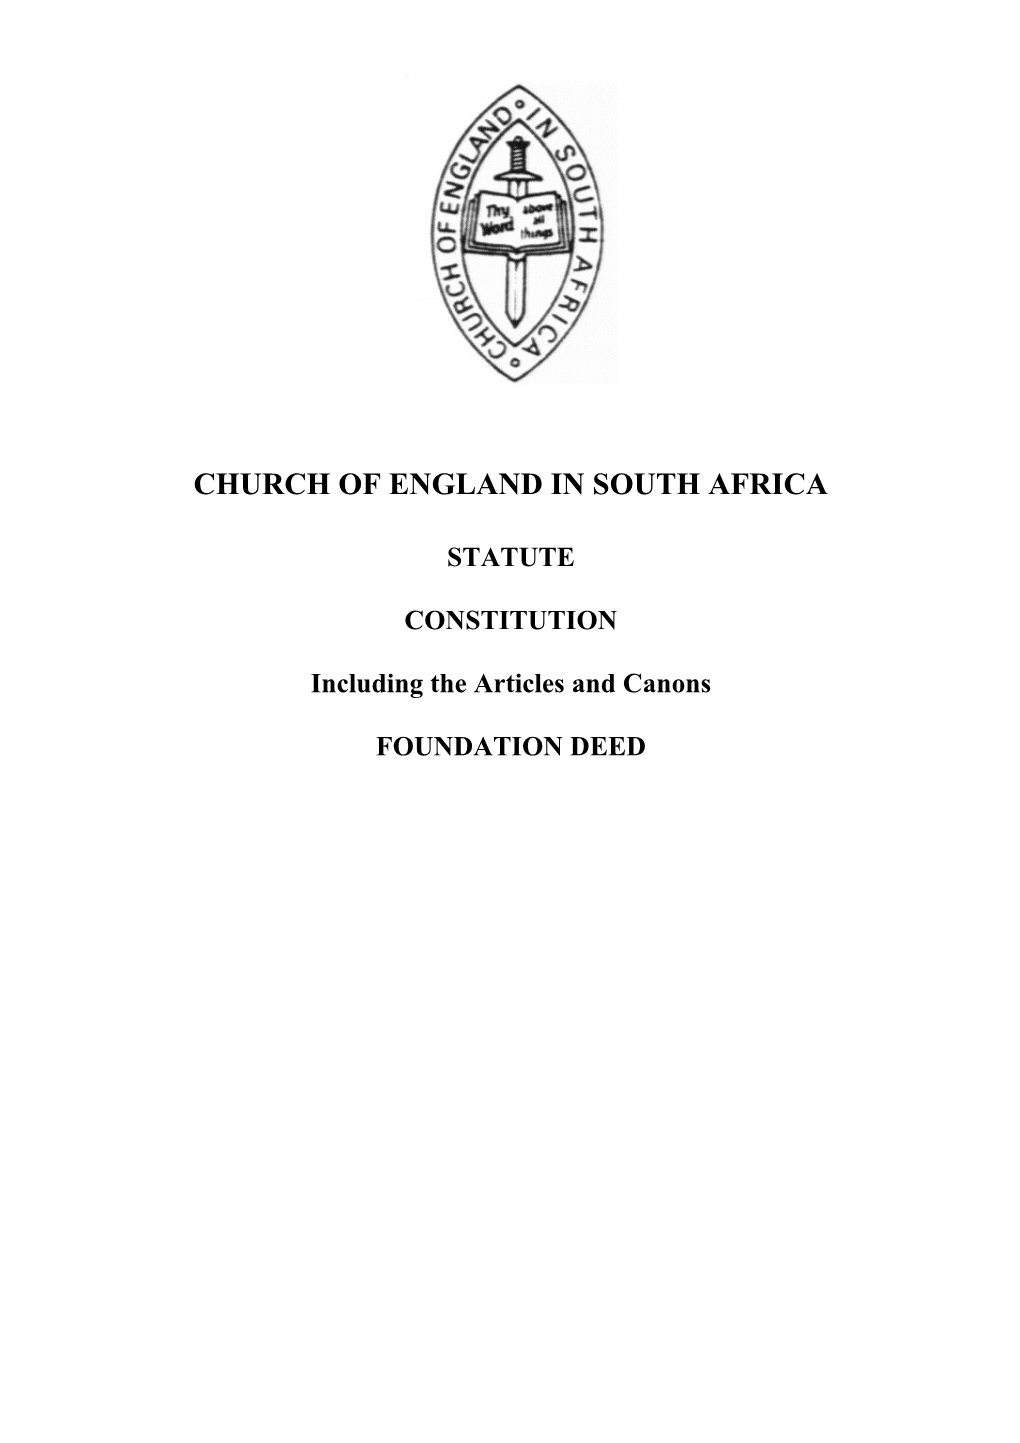 Church of England in South Africa